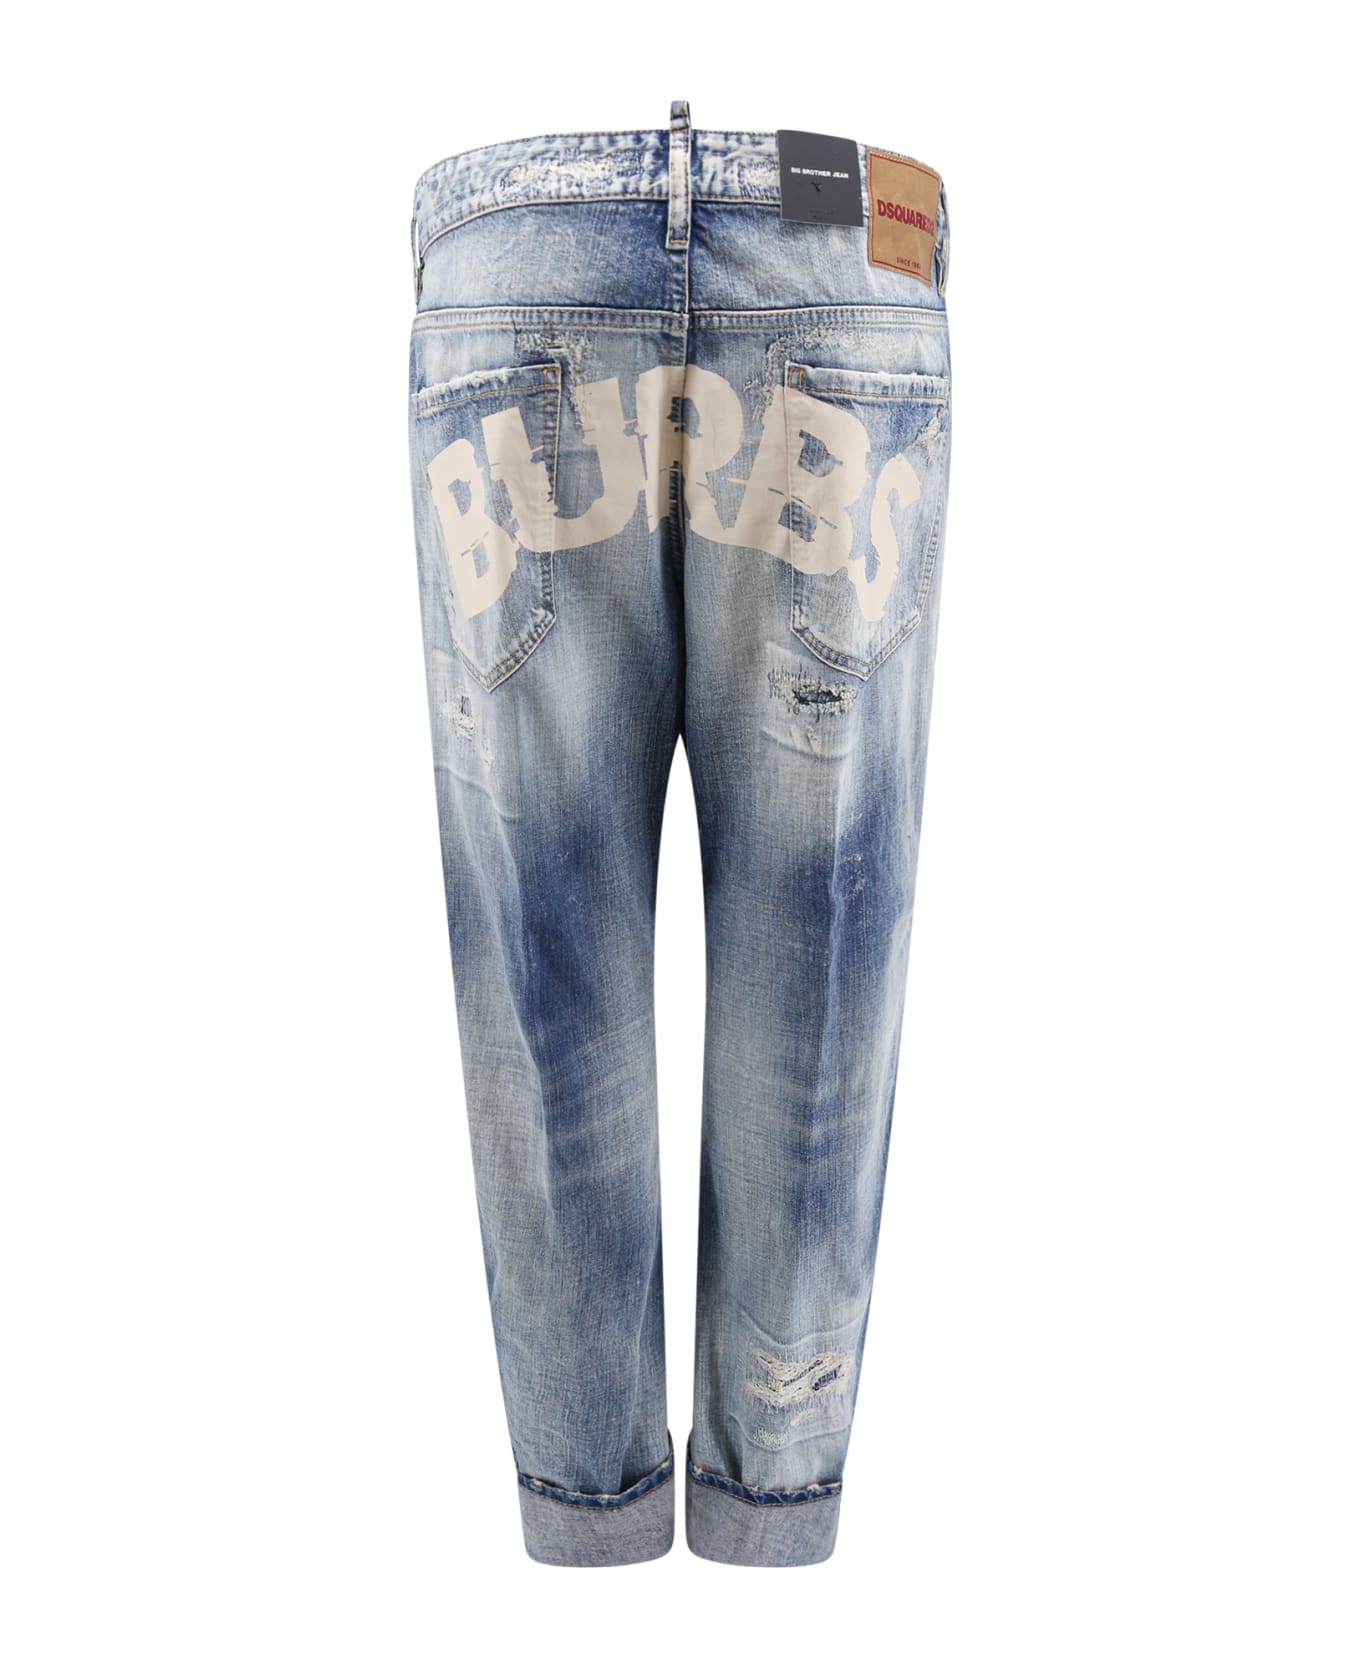 Dsquared2 Big Brother Jean Jeans - Blue